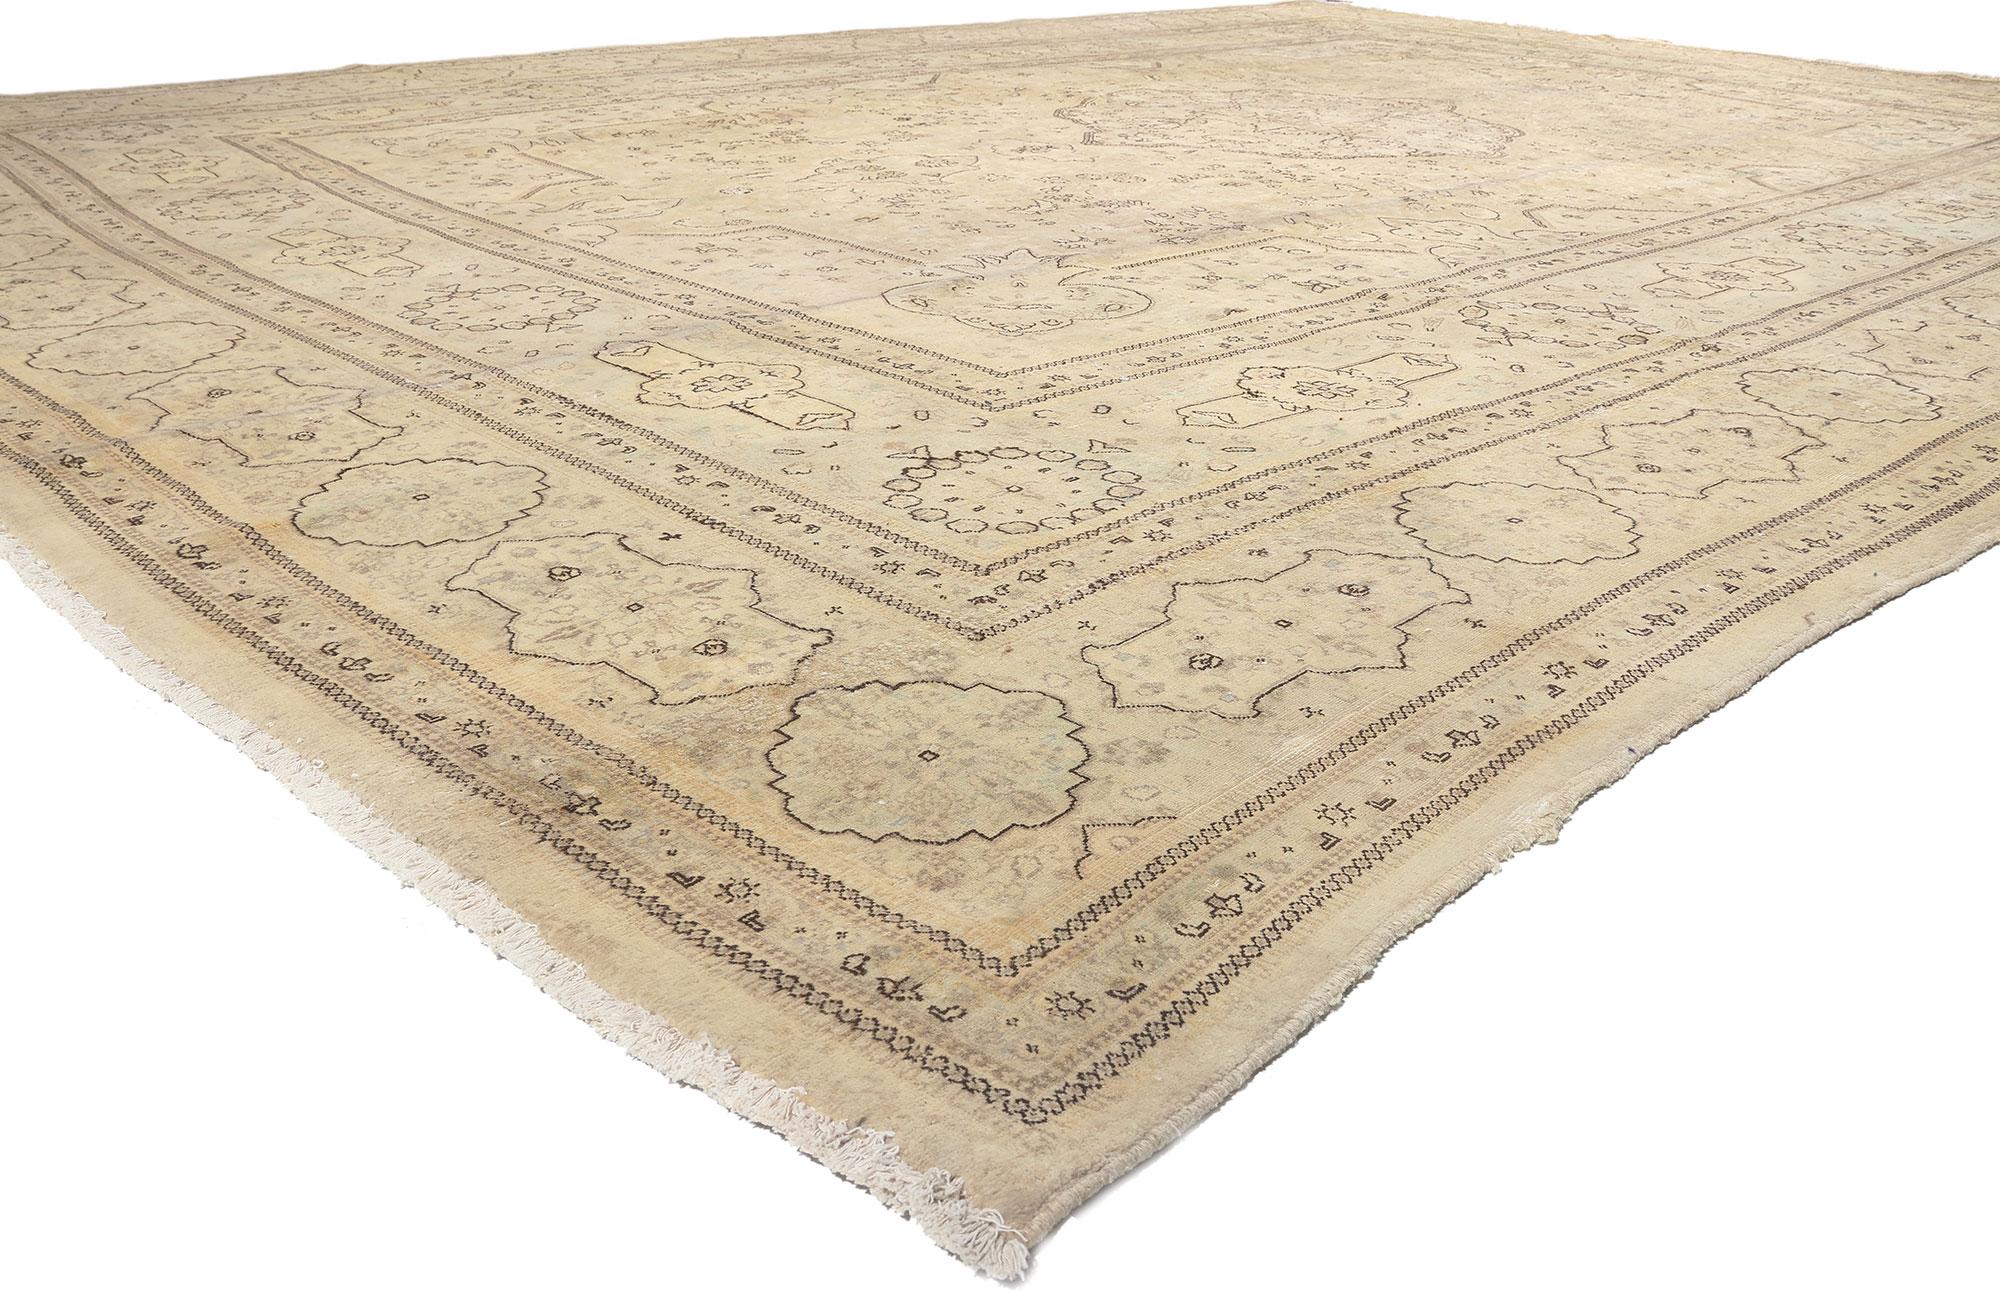 78595 Vintage Persian Tabriz Rug, 13'09 x 18'10. 
Emulating relaxed elegance with incredible detail and texture, this hand knotted vintage Persian Tabriz rug is a captivating vision of woven beauty. The faded floral design and soft colors woven into